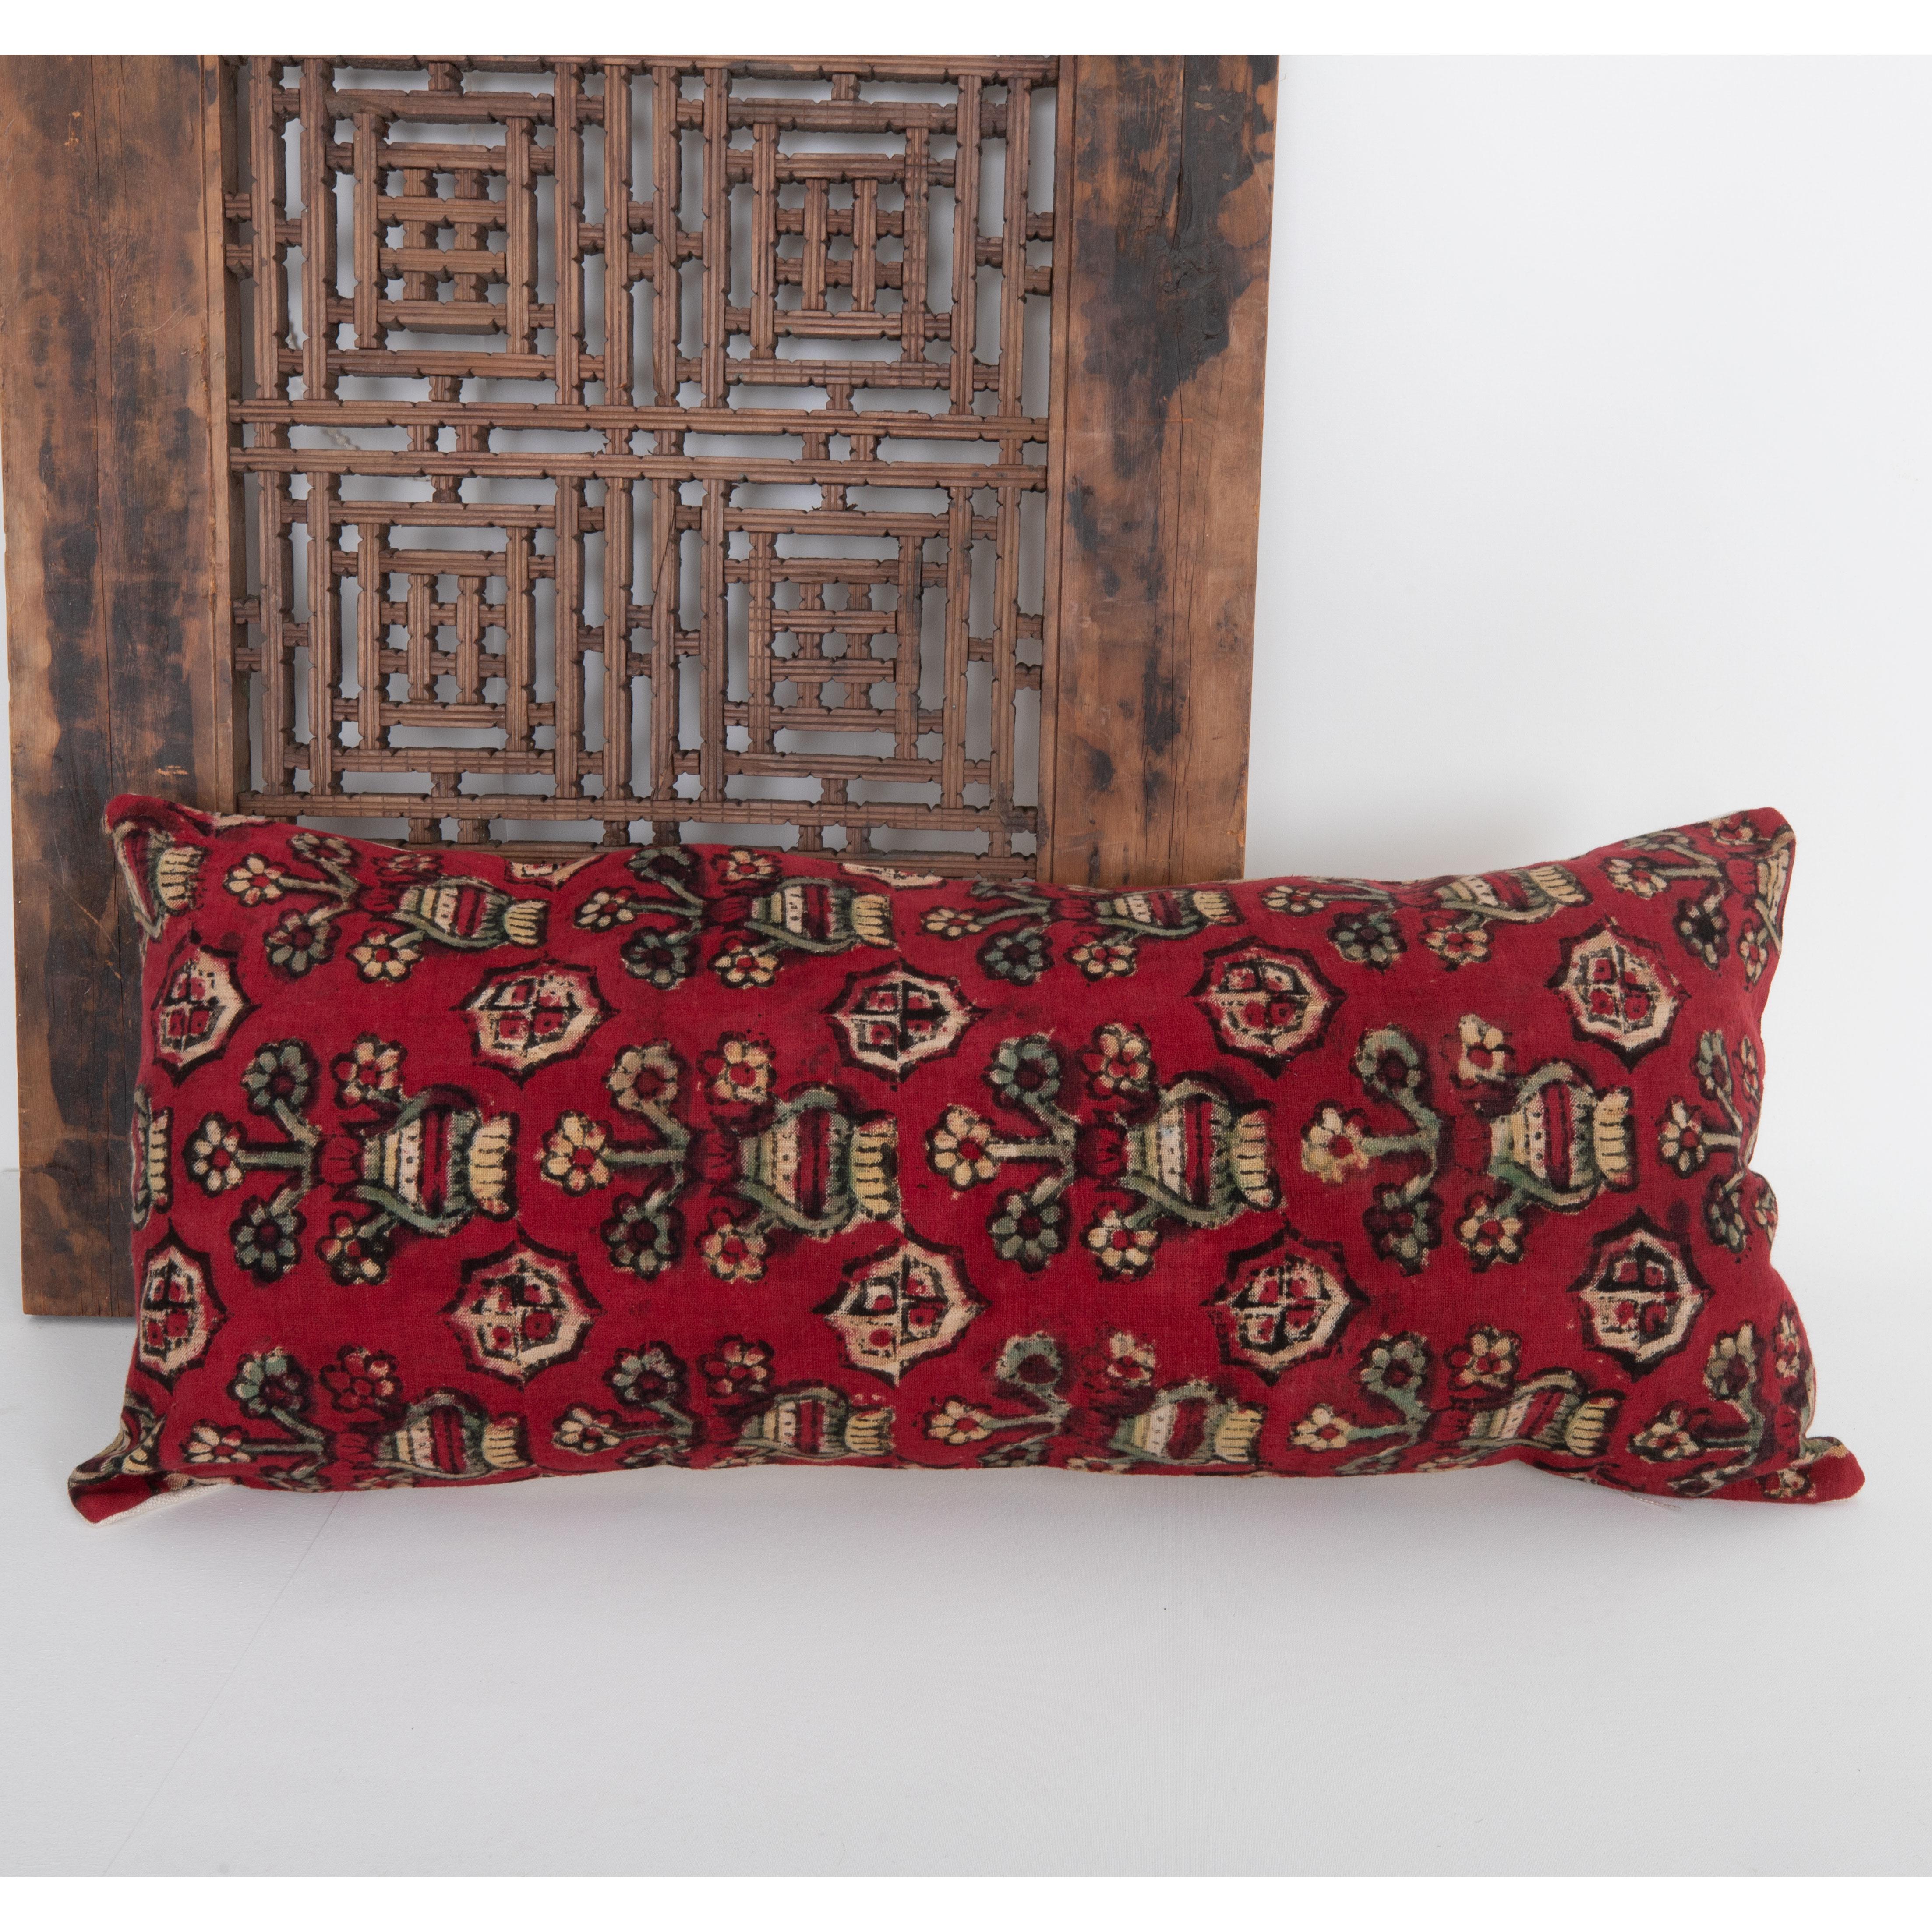 20th Century Block Printed Lumbar Pillow Cover from Western Anatolia, Turkey, 1st Half 20th C For Sale